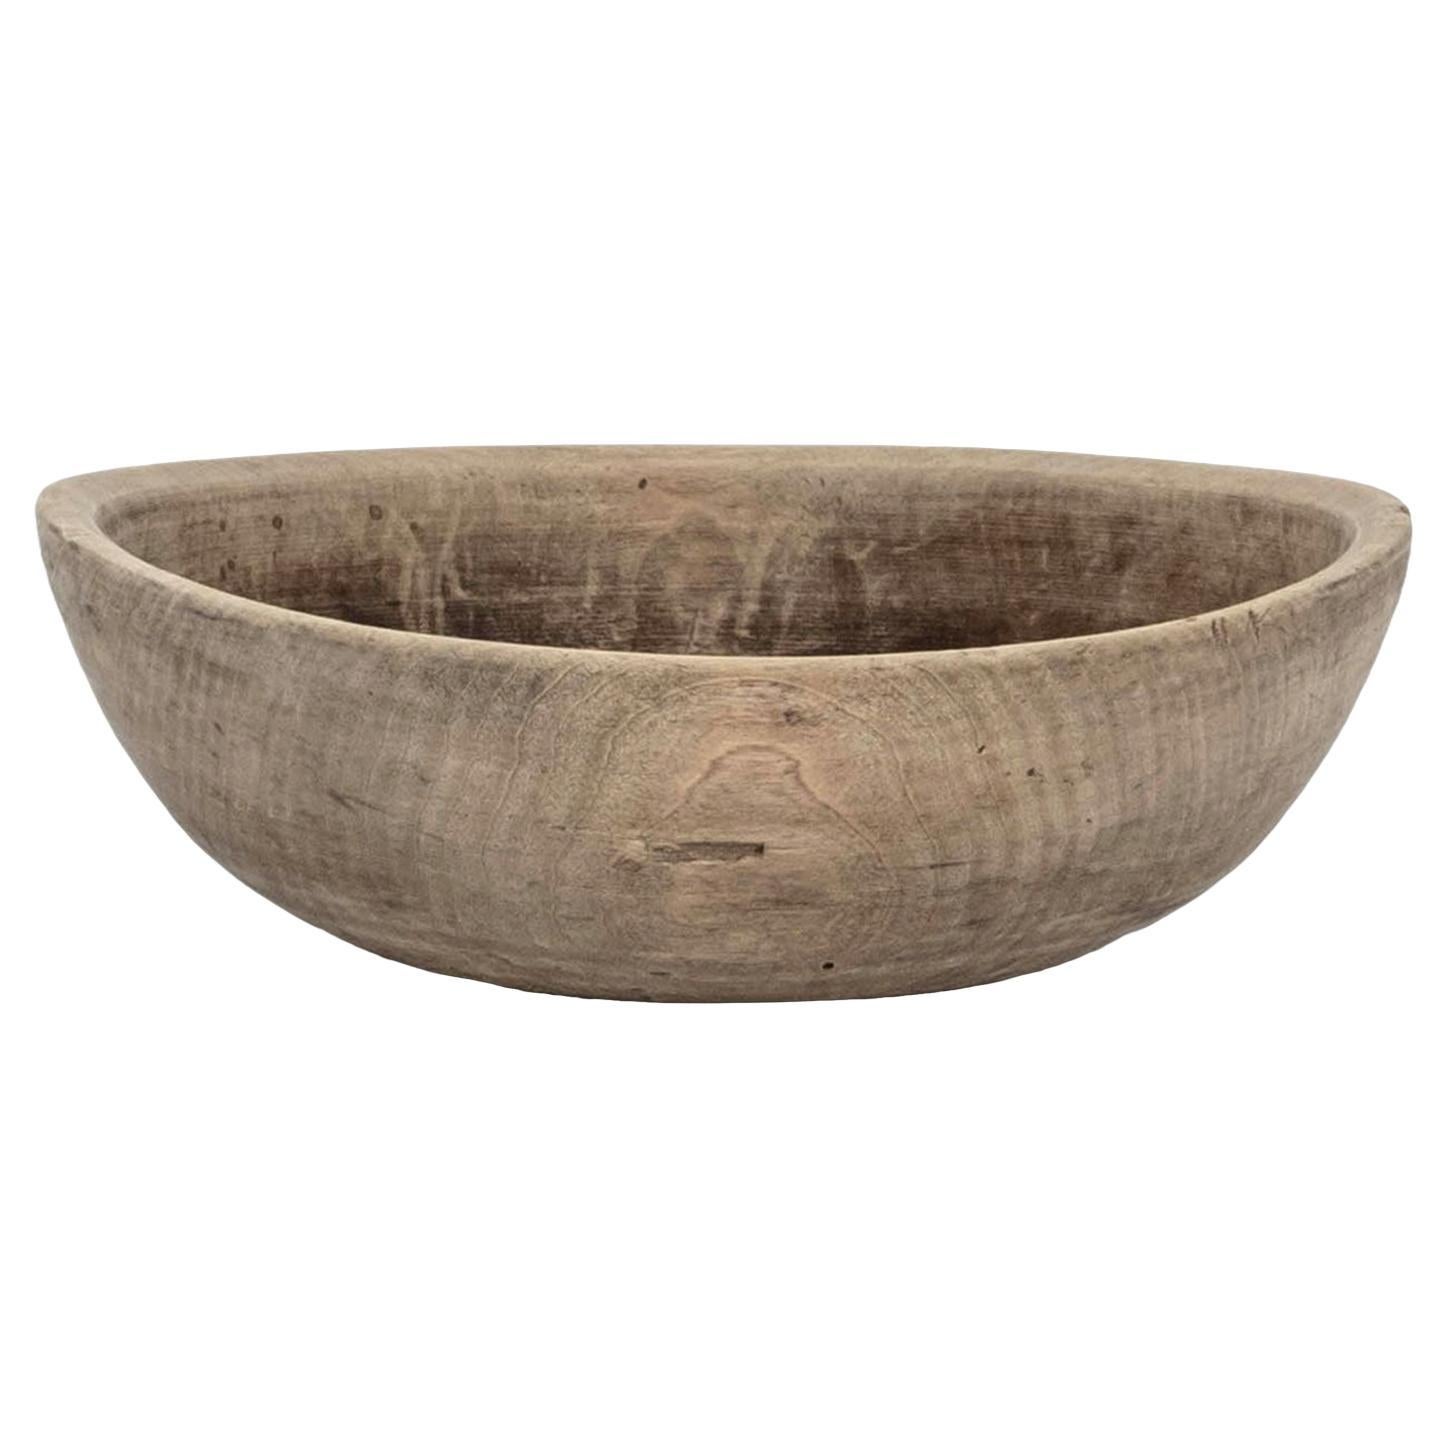 Rustic Swedish Herb Turned Bowl with Makers Brand